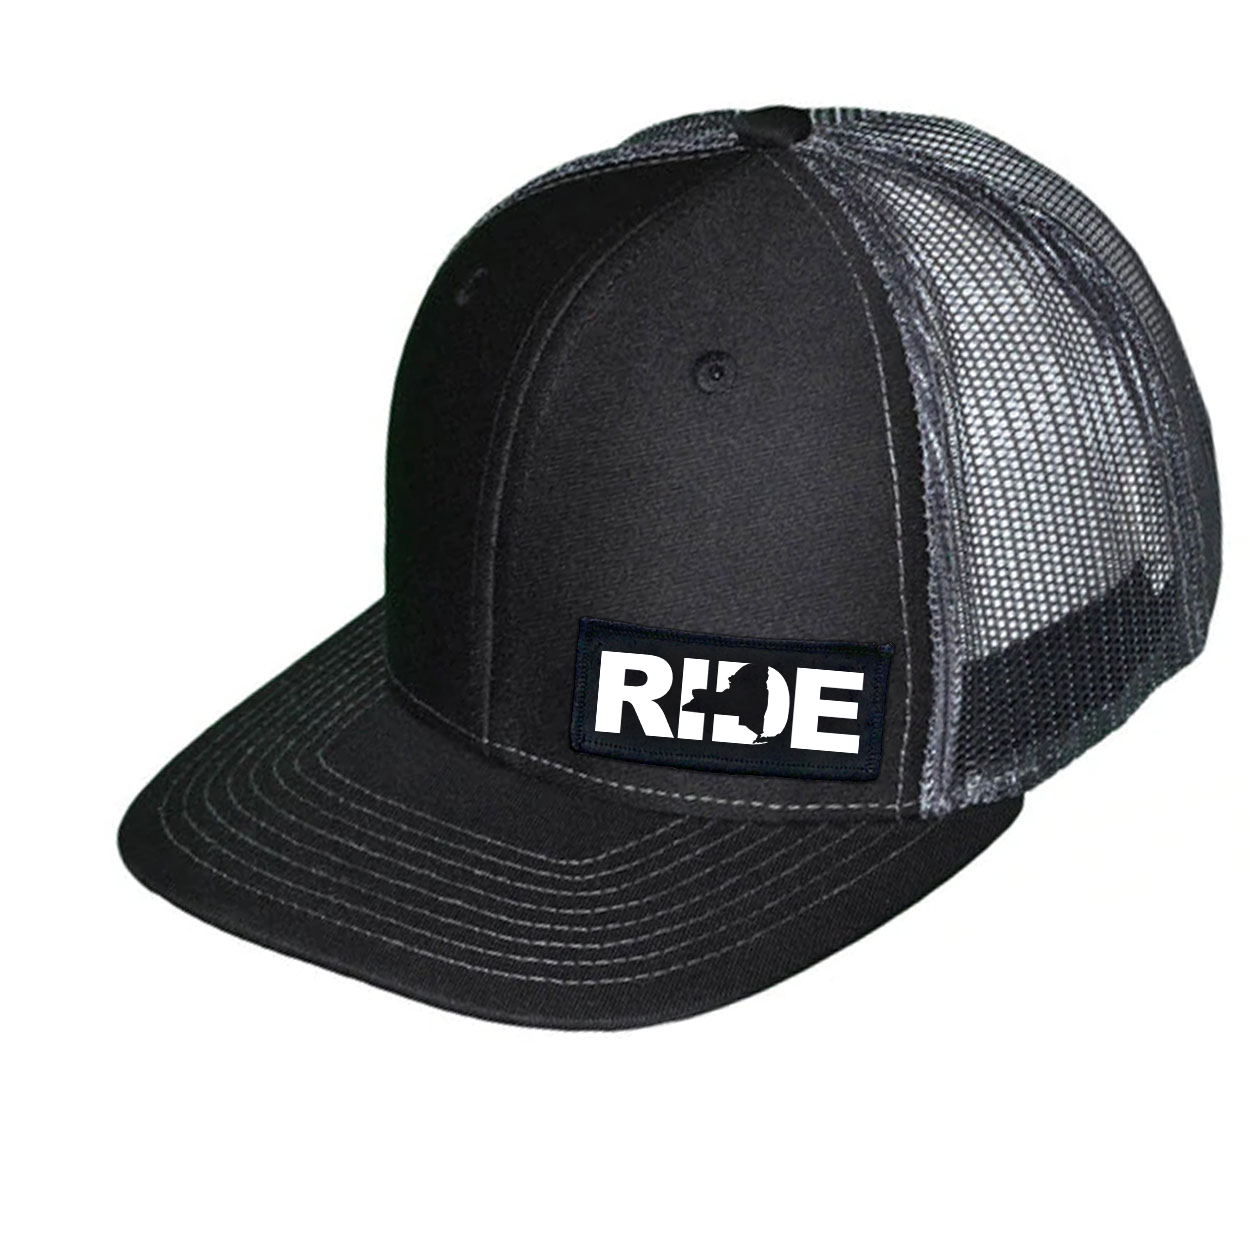 Ride New York Night Out Pro Embroidered Snapback Trucker Hat Black/Gray